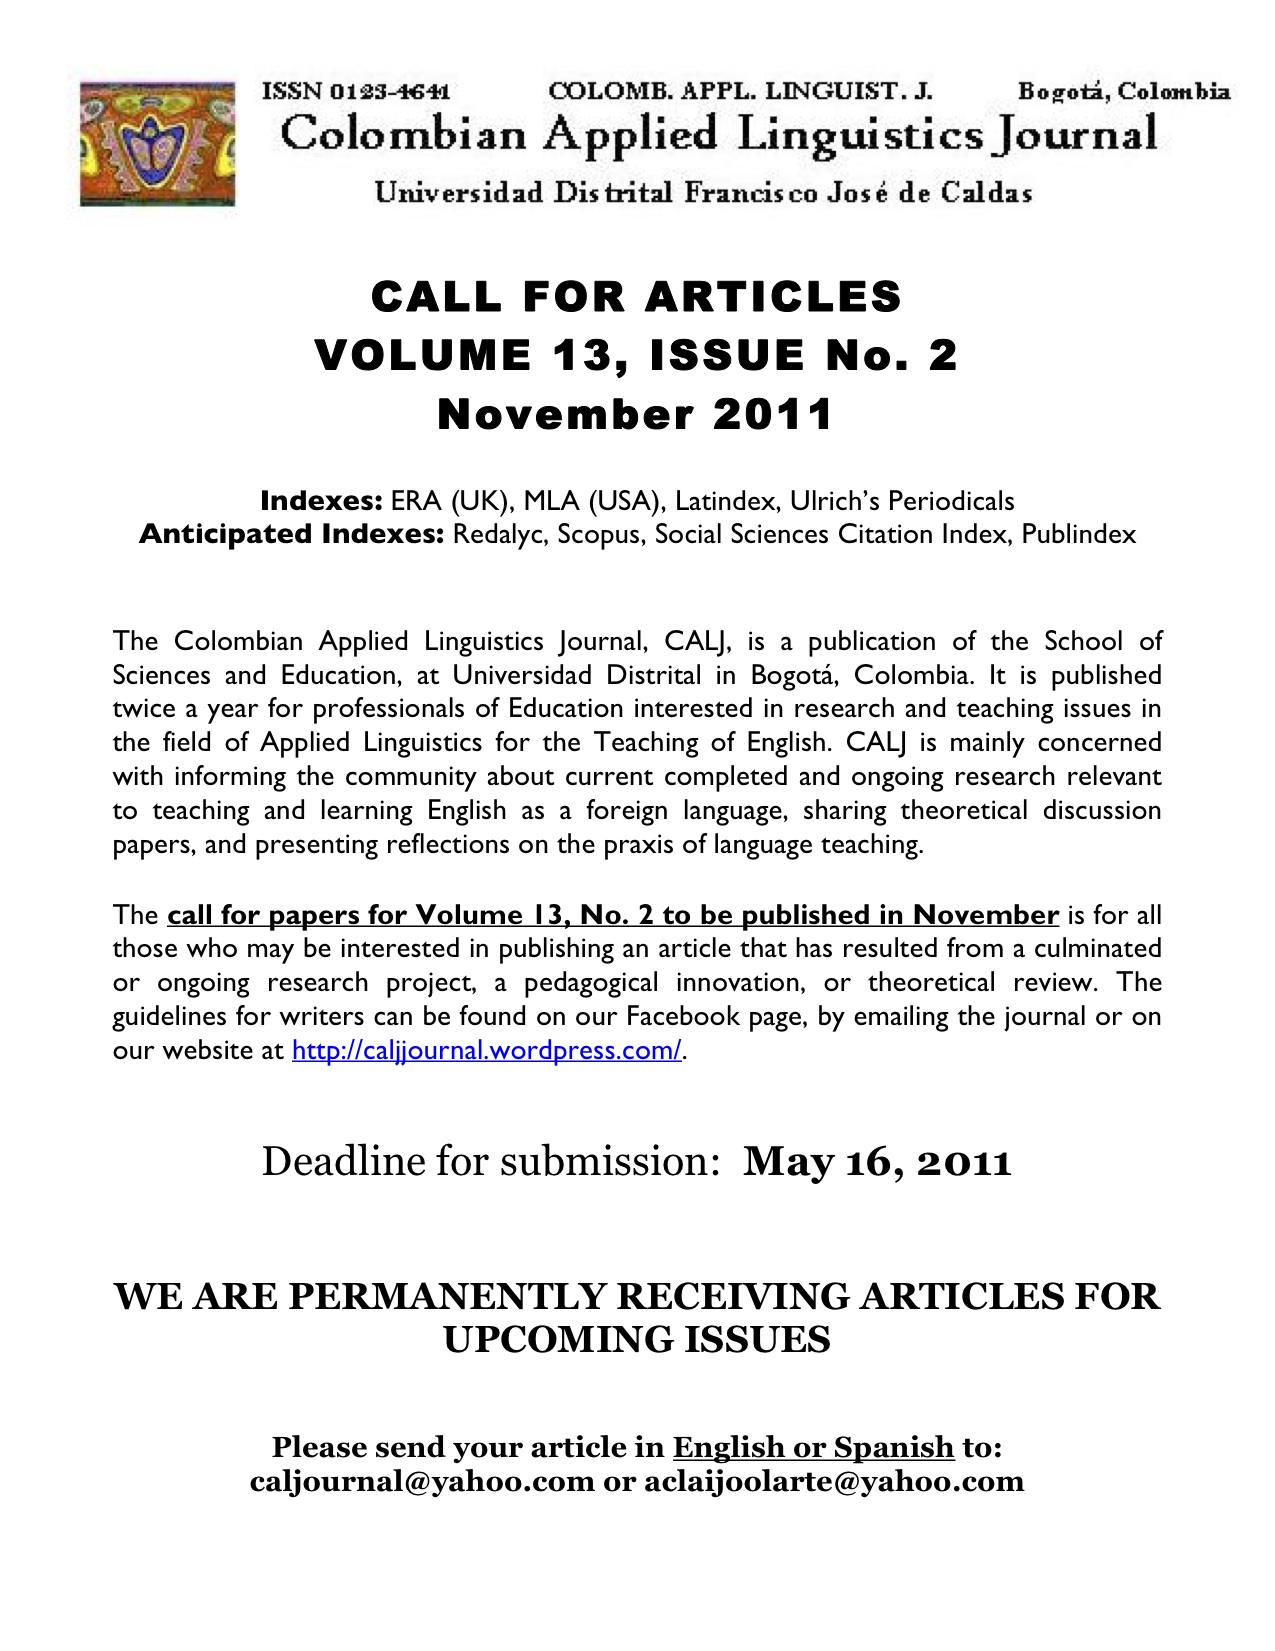 Call for research papers 2011